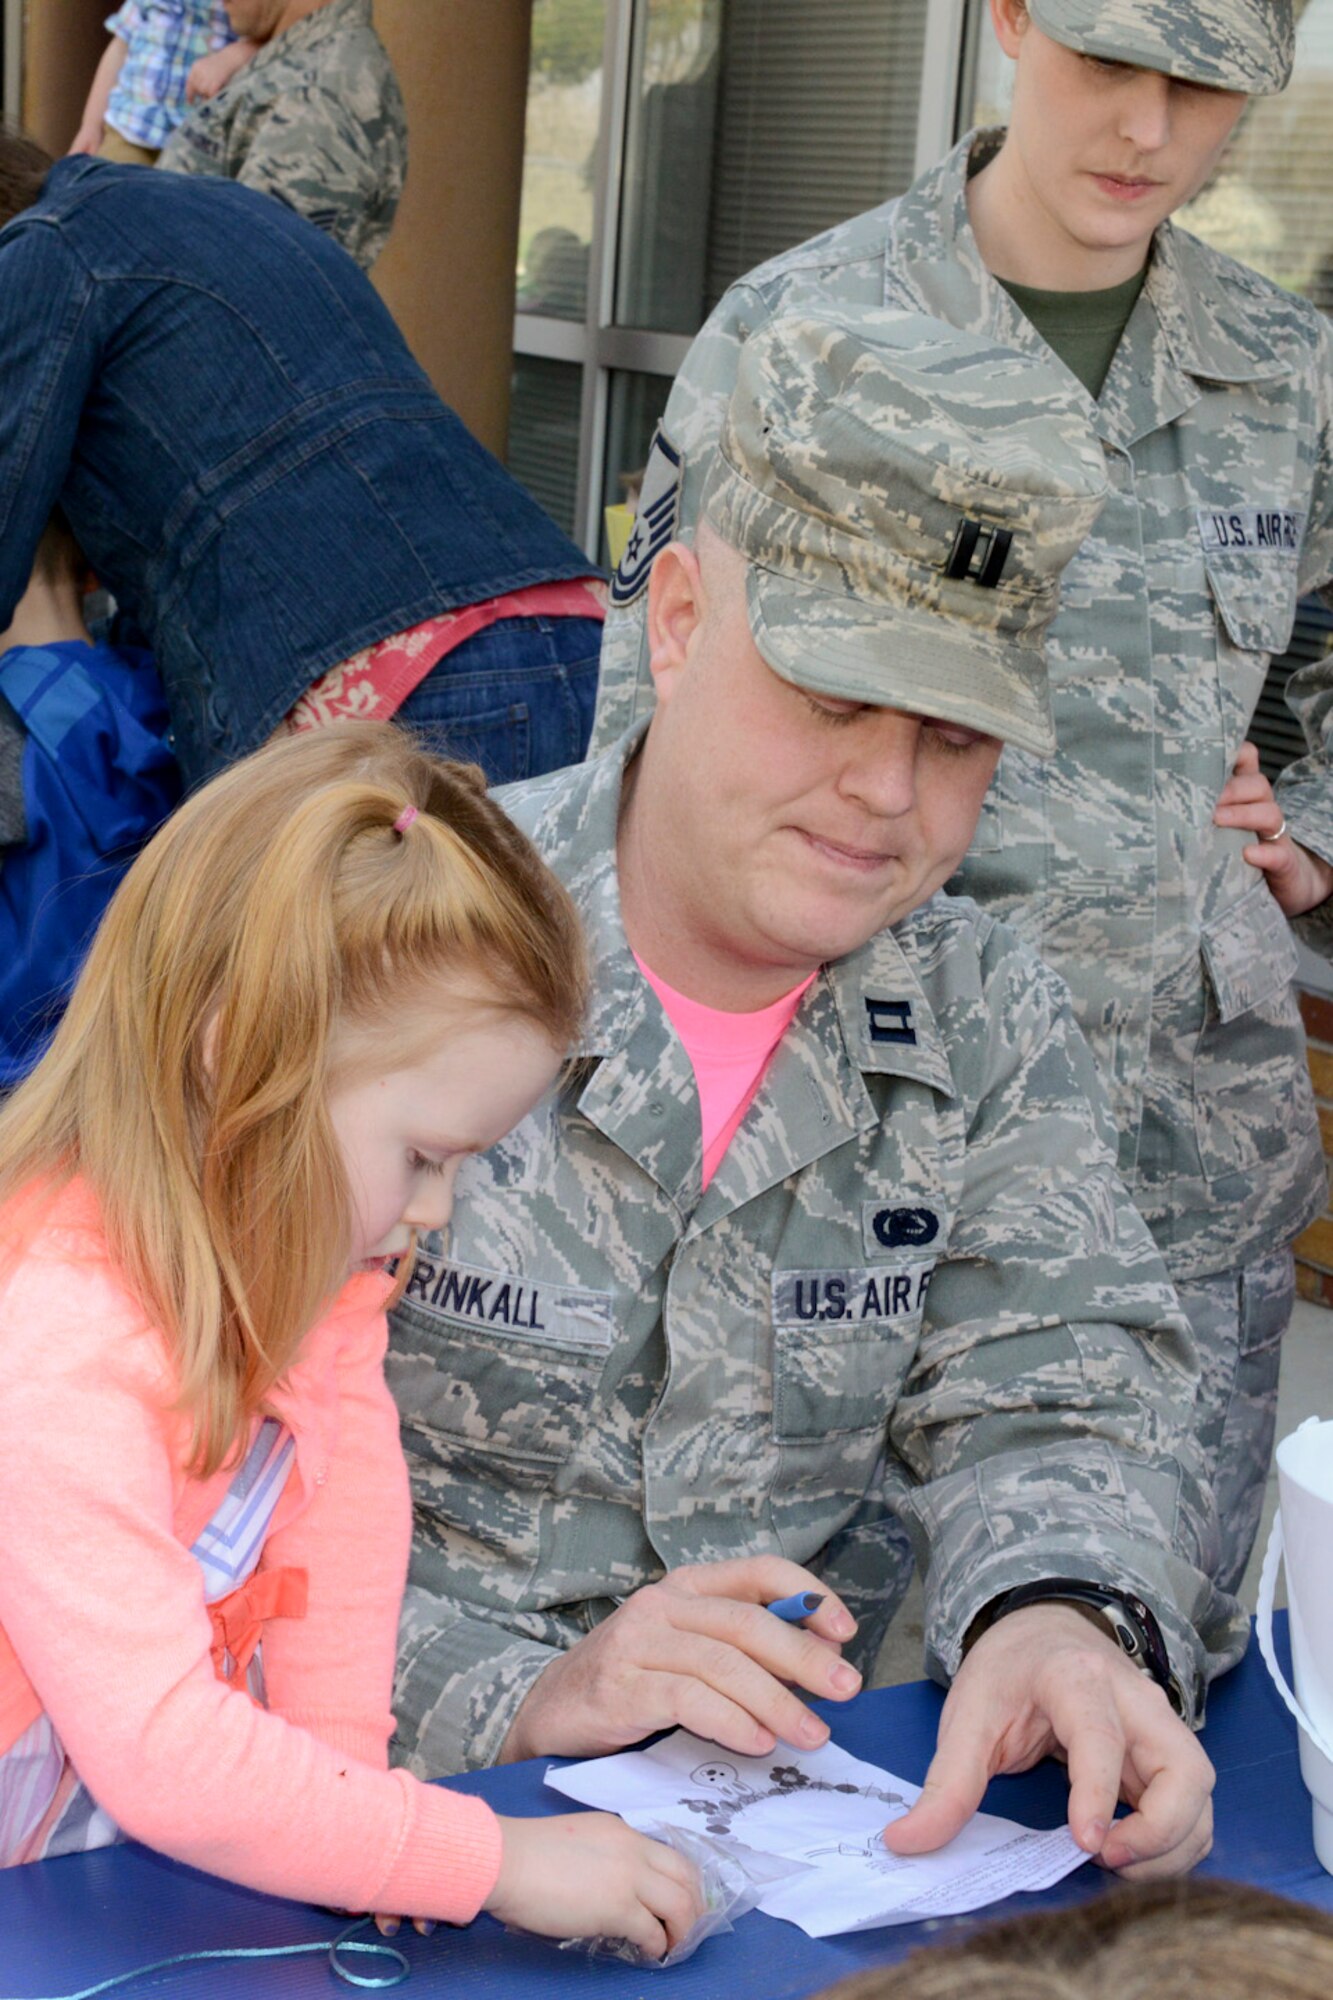 Capt. Lee Drinkall (middle) and Master Sgt. Charisse Drinkall make crafts with their daughter Scarlett during the 2015 Annual Easter Egg Hunt held outside of the Dining Facility of the 132d Wing, Des Moines, Iowa on Saturday, April 11, 2015.  (U.S. Air National Guard photo by Tech. Sgt. Michael B. McGhee/Released)